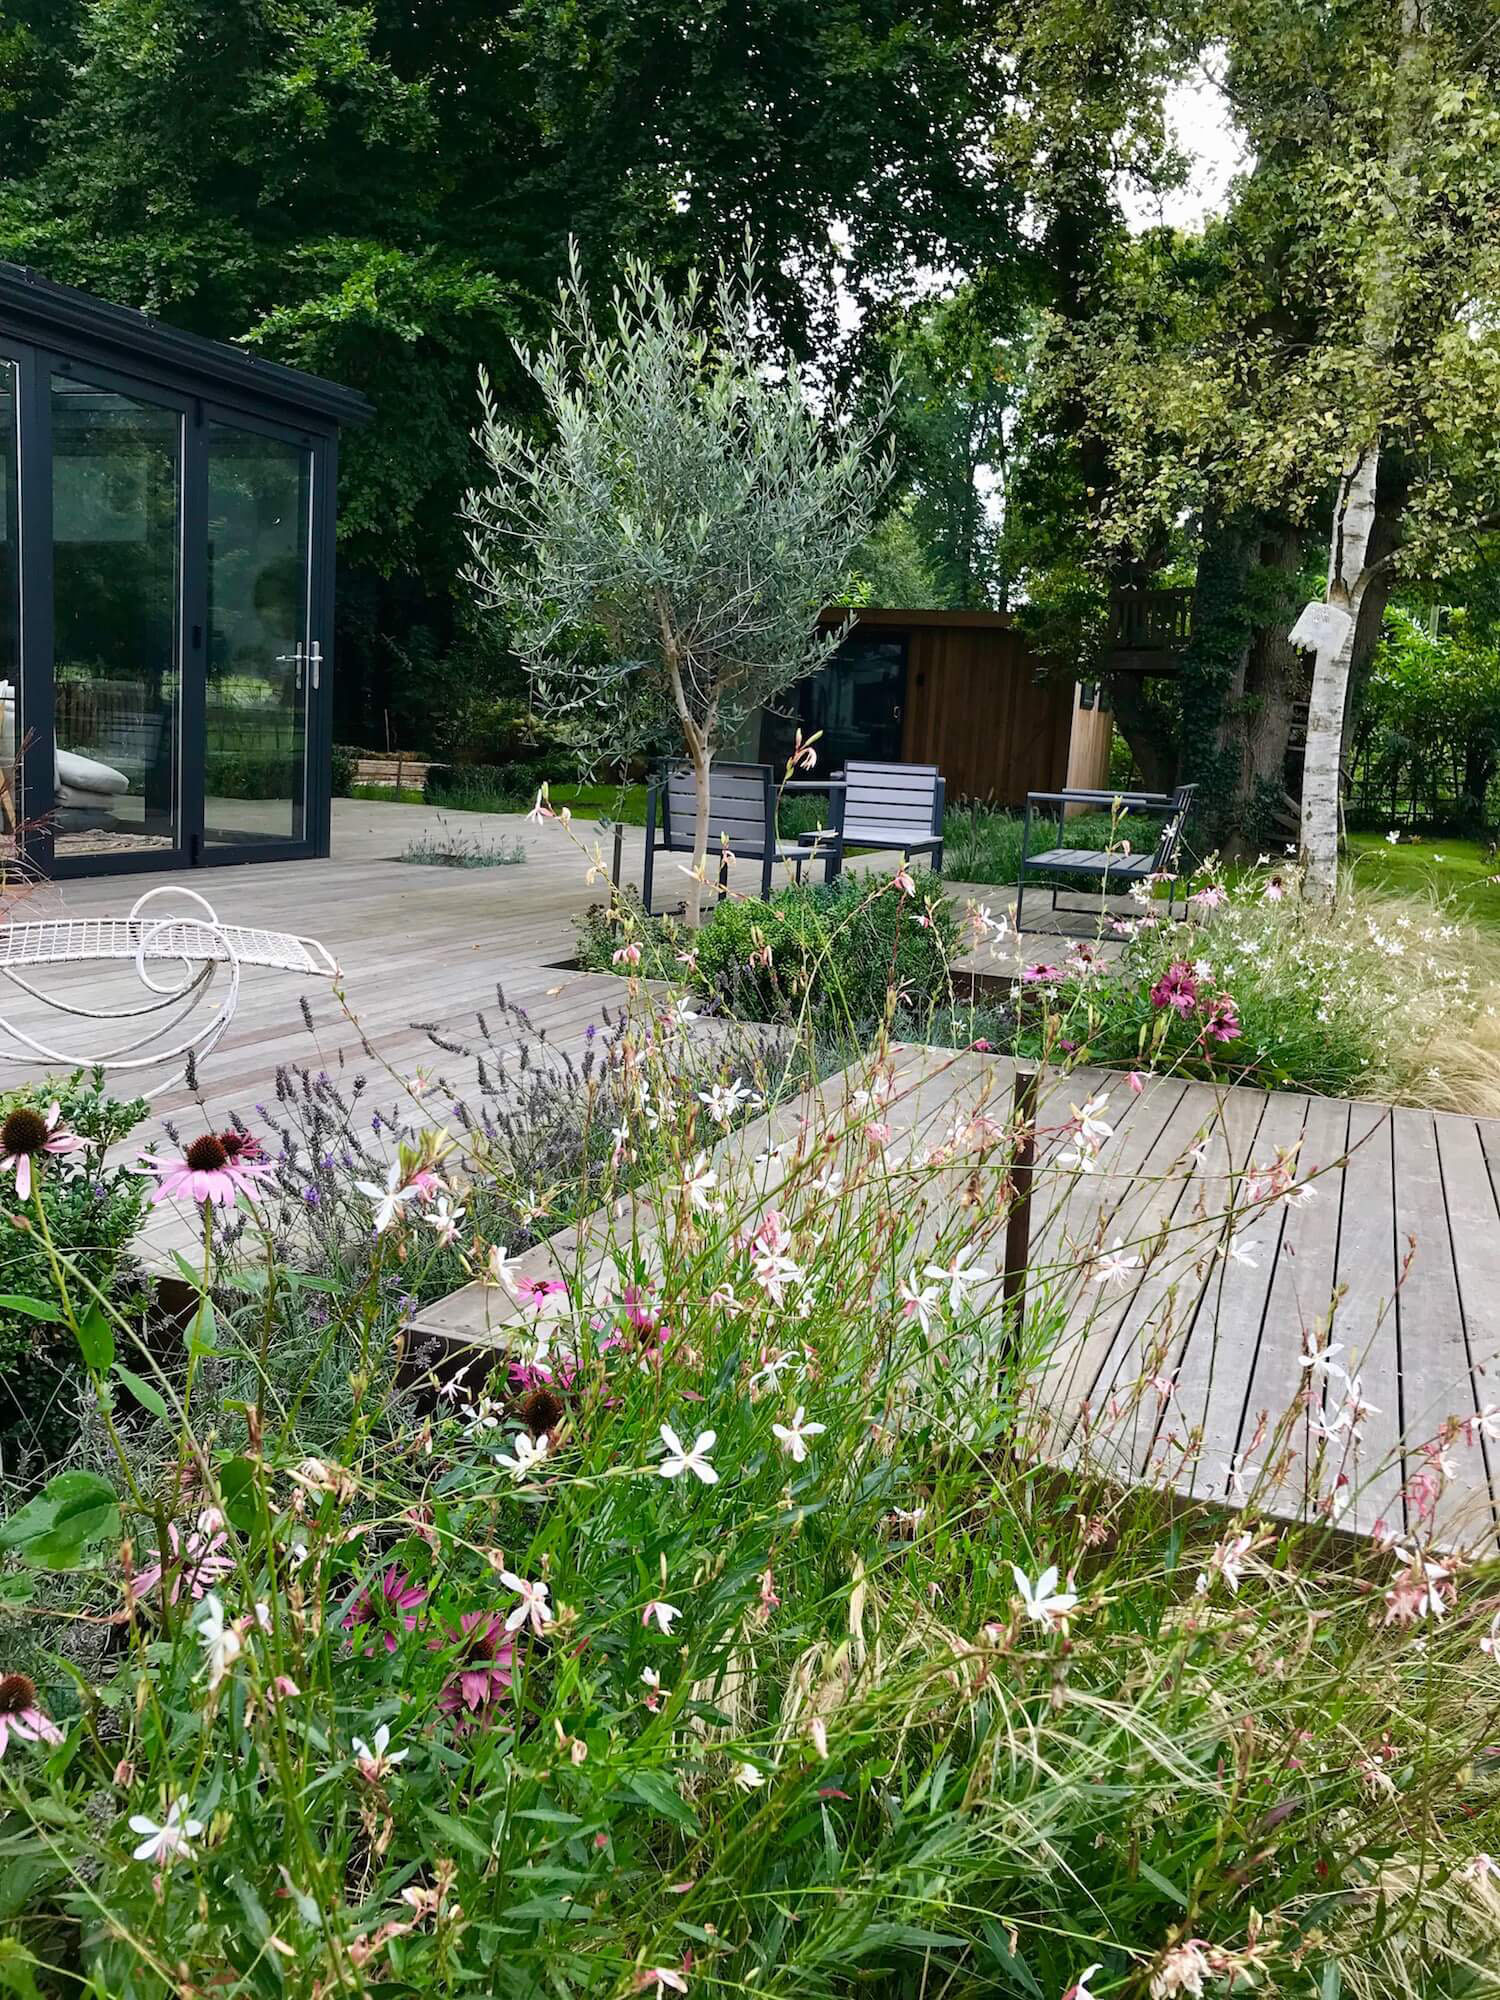 music studio in garden lakeside decked with colourful planting